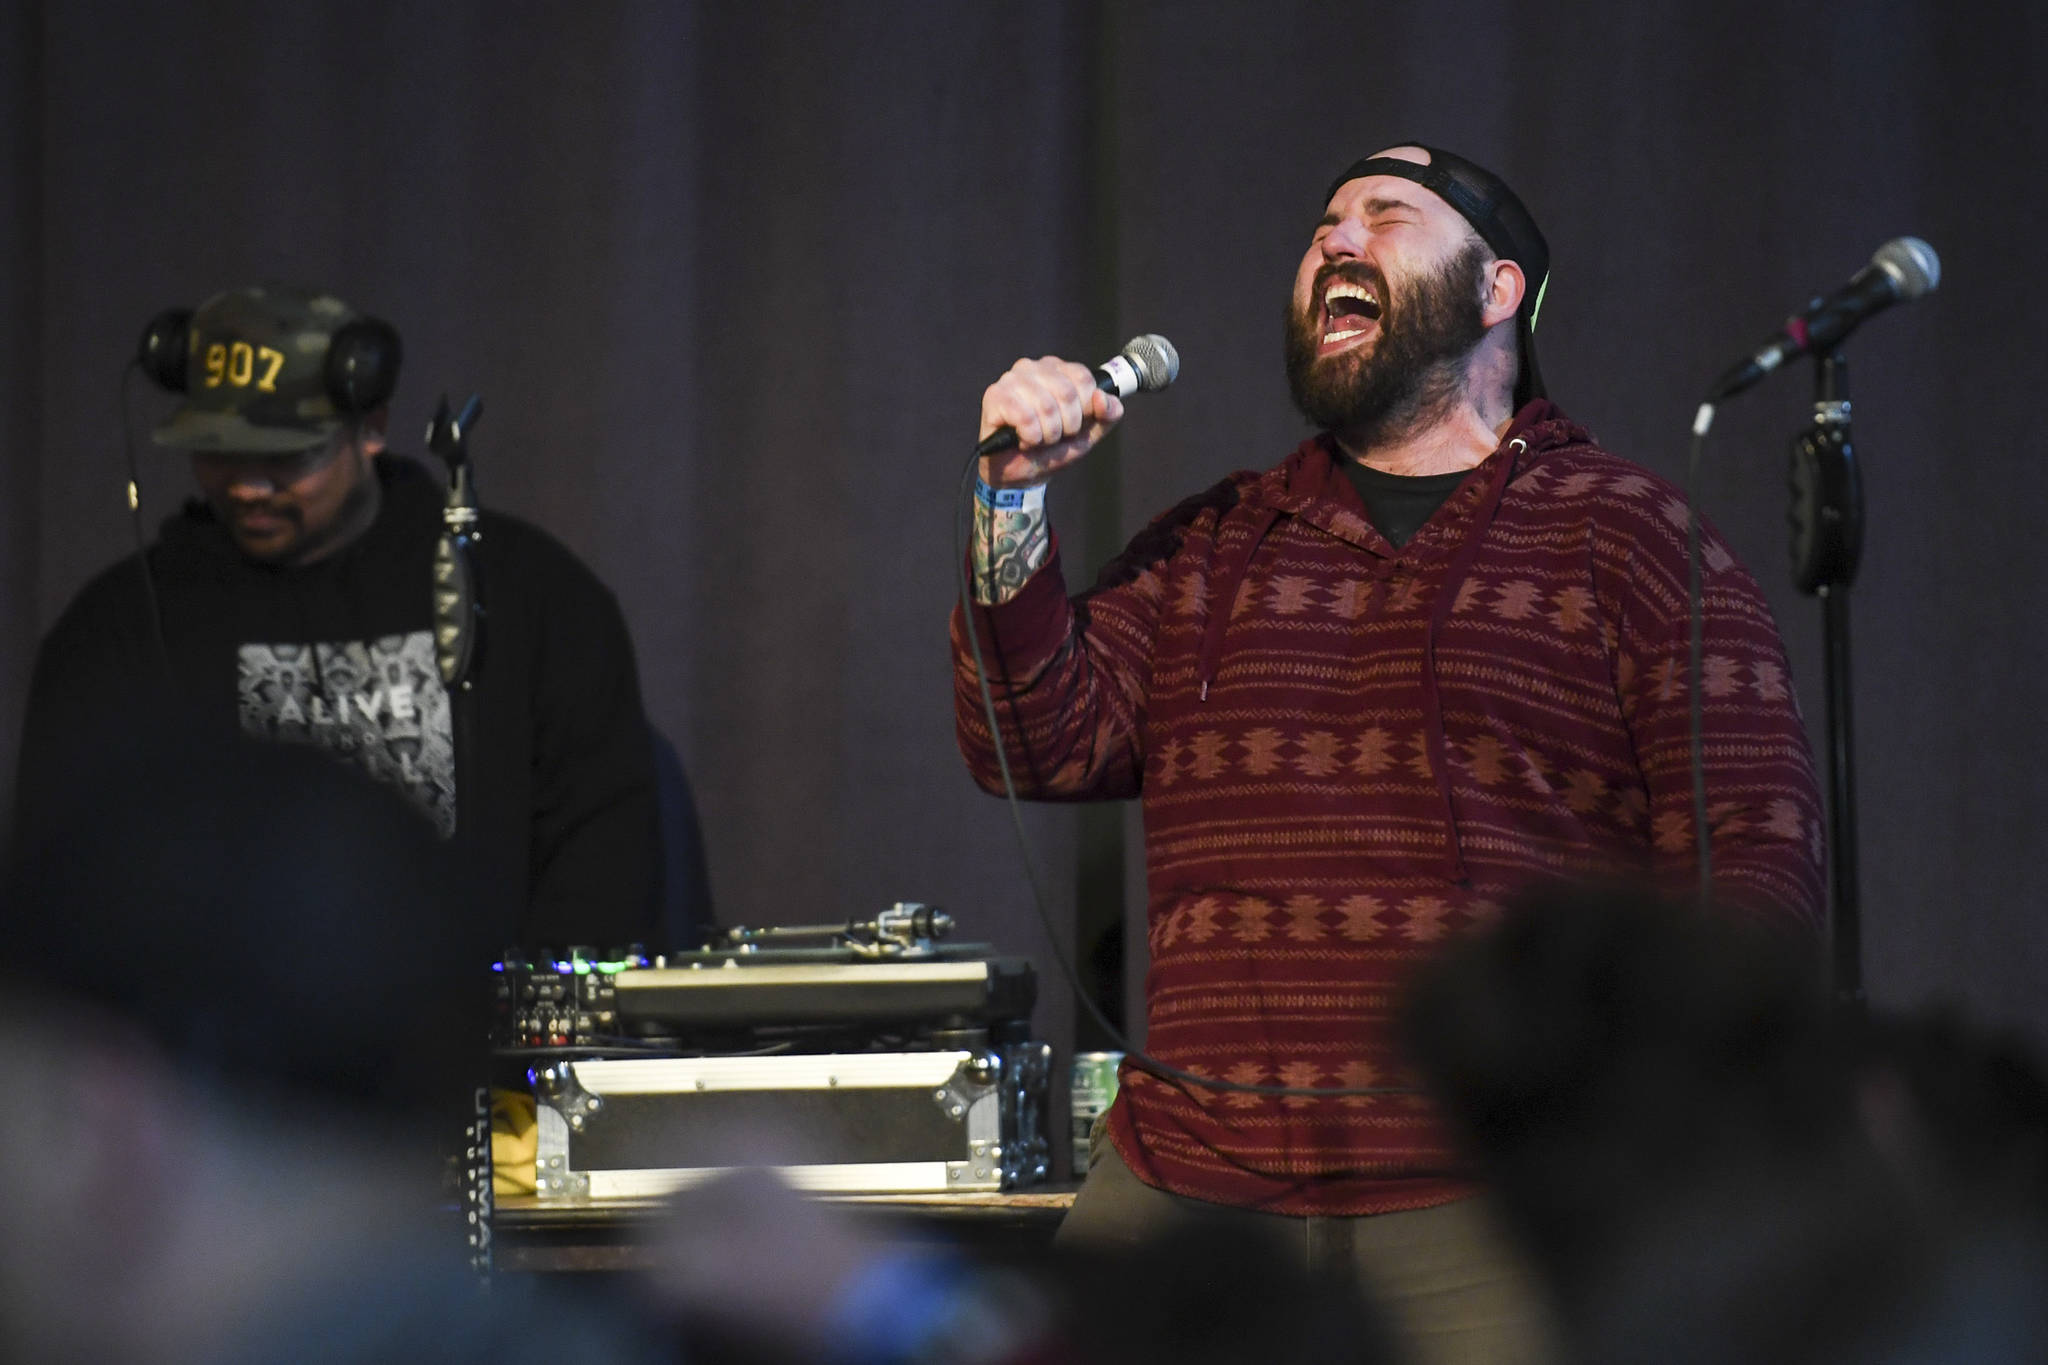 Glenn Ojard performs during the Killah Priest of Wu Tang Southeast Tour at the Juneau Arts & Culture Center on Friday, Dec. 20, 2019. (Michael Penn | Juneau Empire)